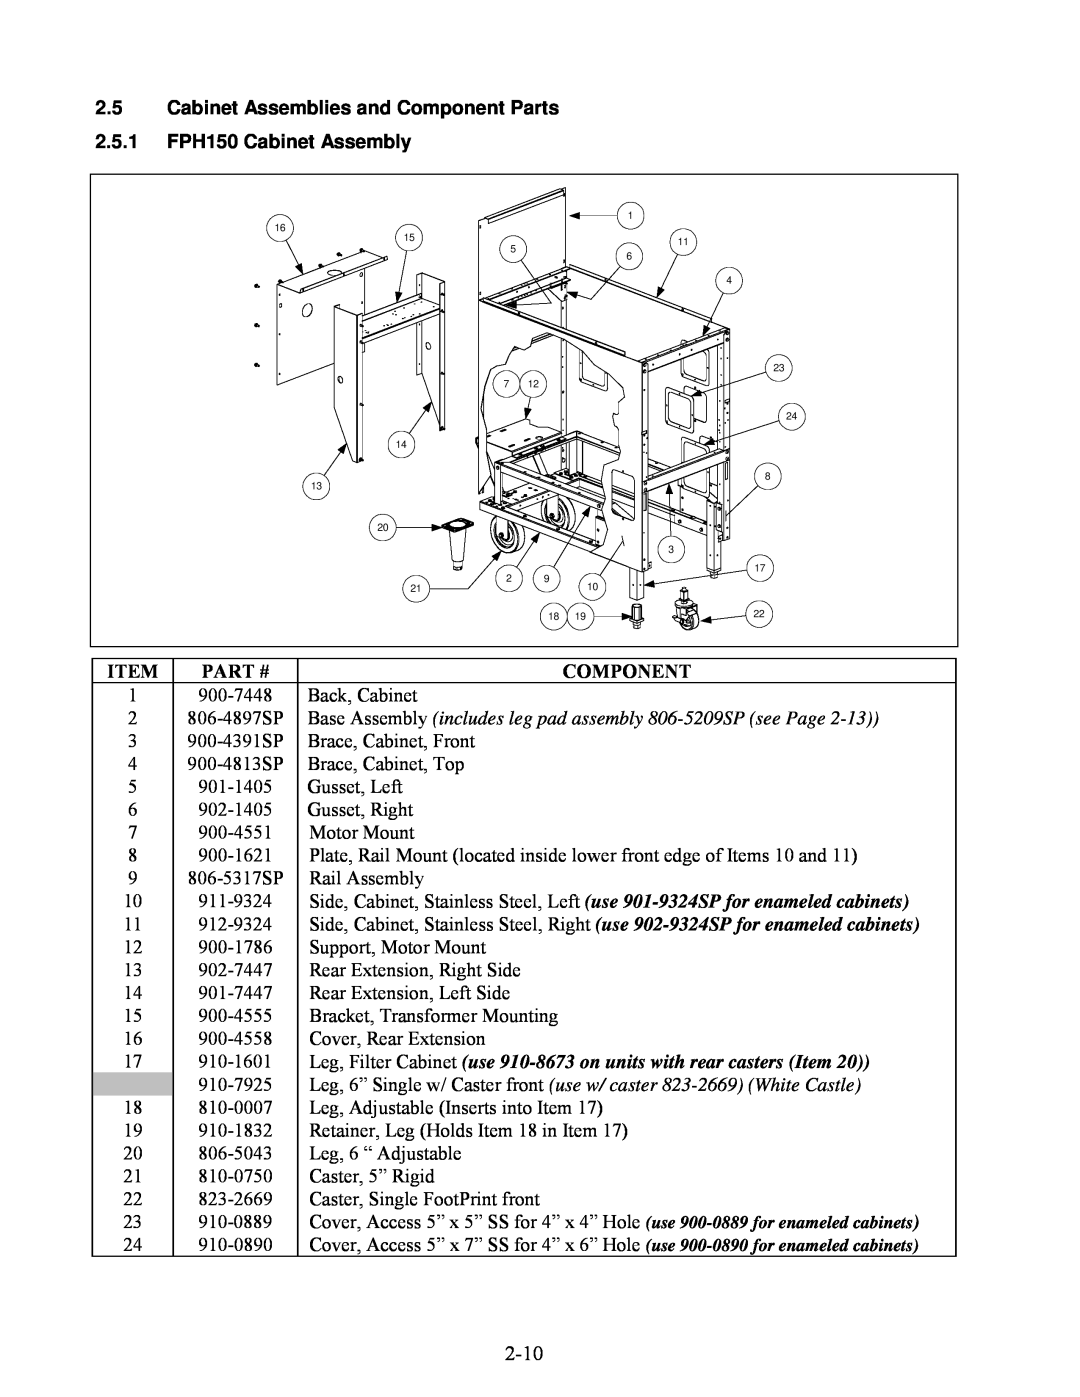 Frymaster H50 Series manual 2.5Cabinet Assemblies and Component Parts, 2.5.1FPH150 Cabinet Assembly, Item, Part # 